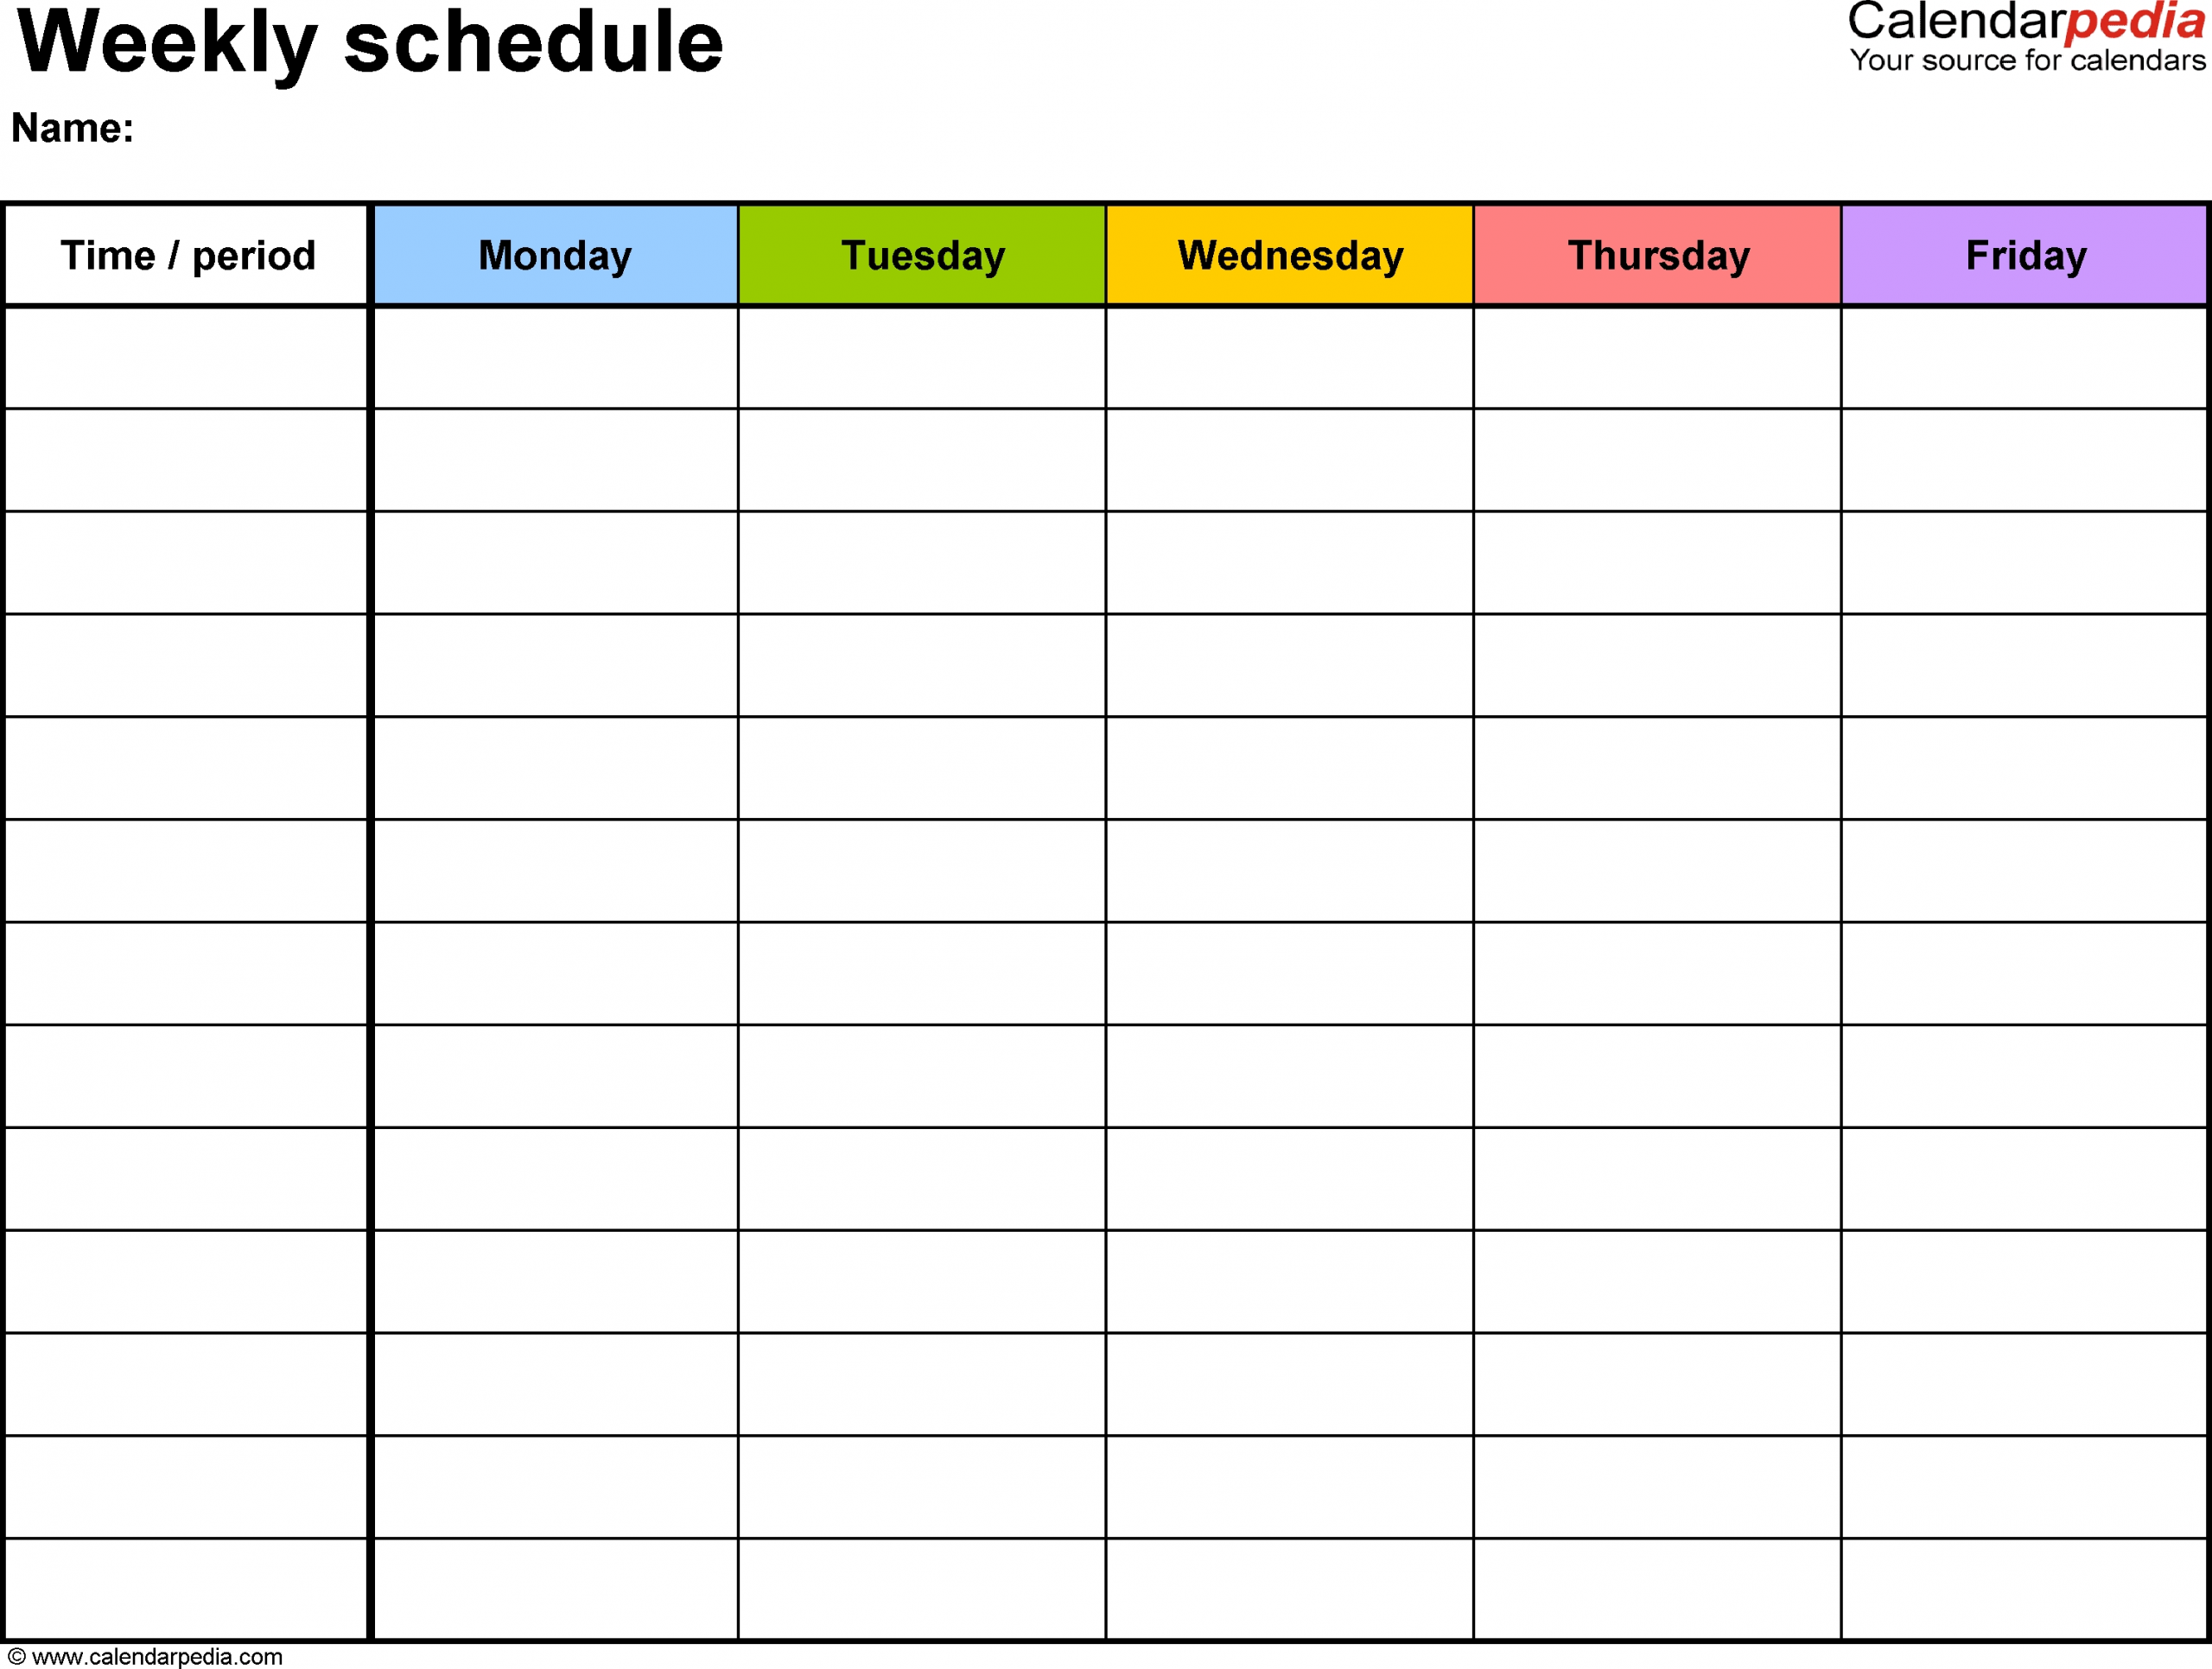 Free Weekly Schedule Templates For Word - 18 Templates with School Calendar Template Monday Thursday